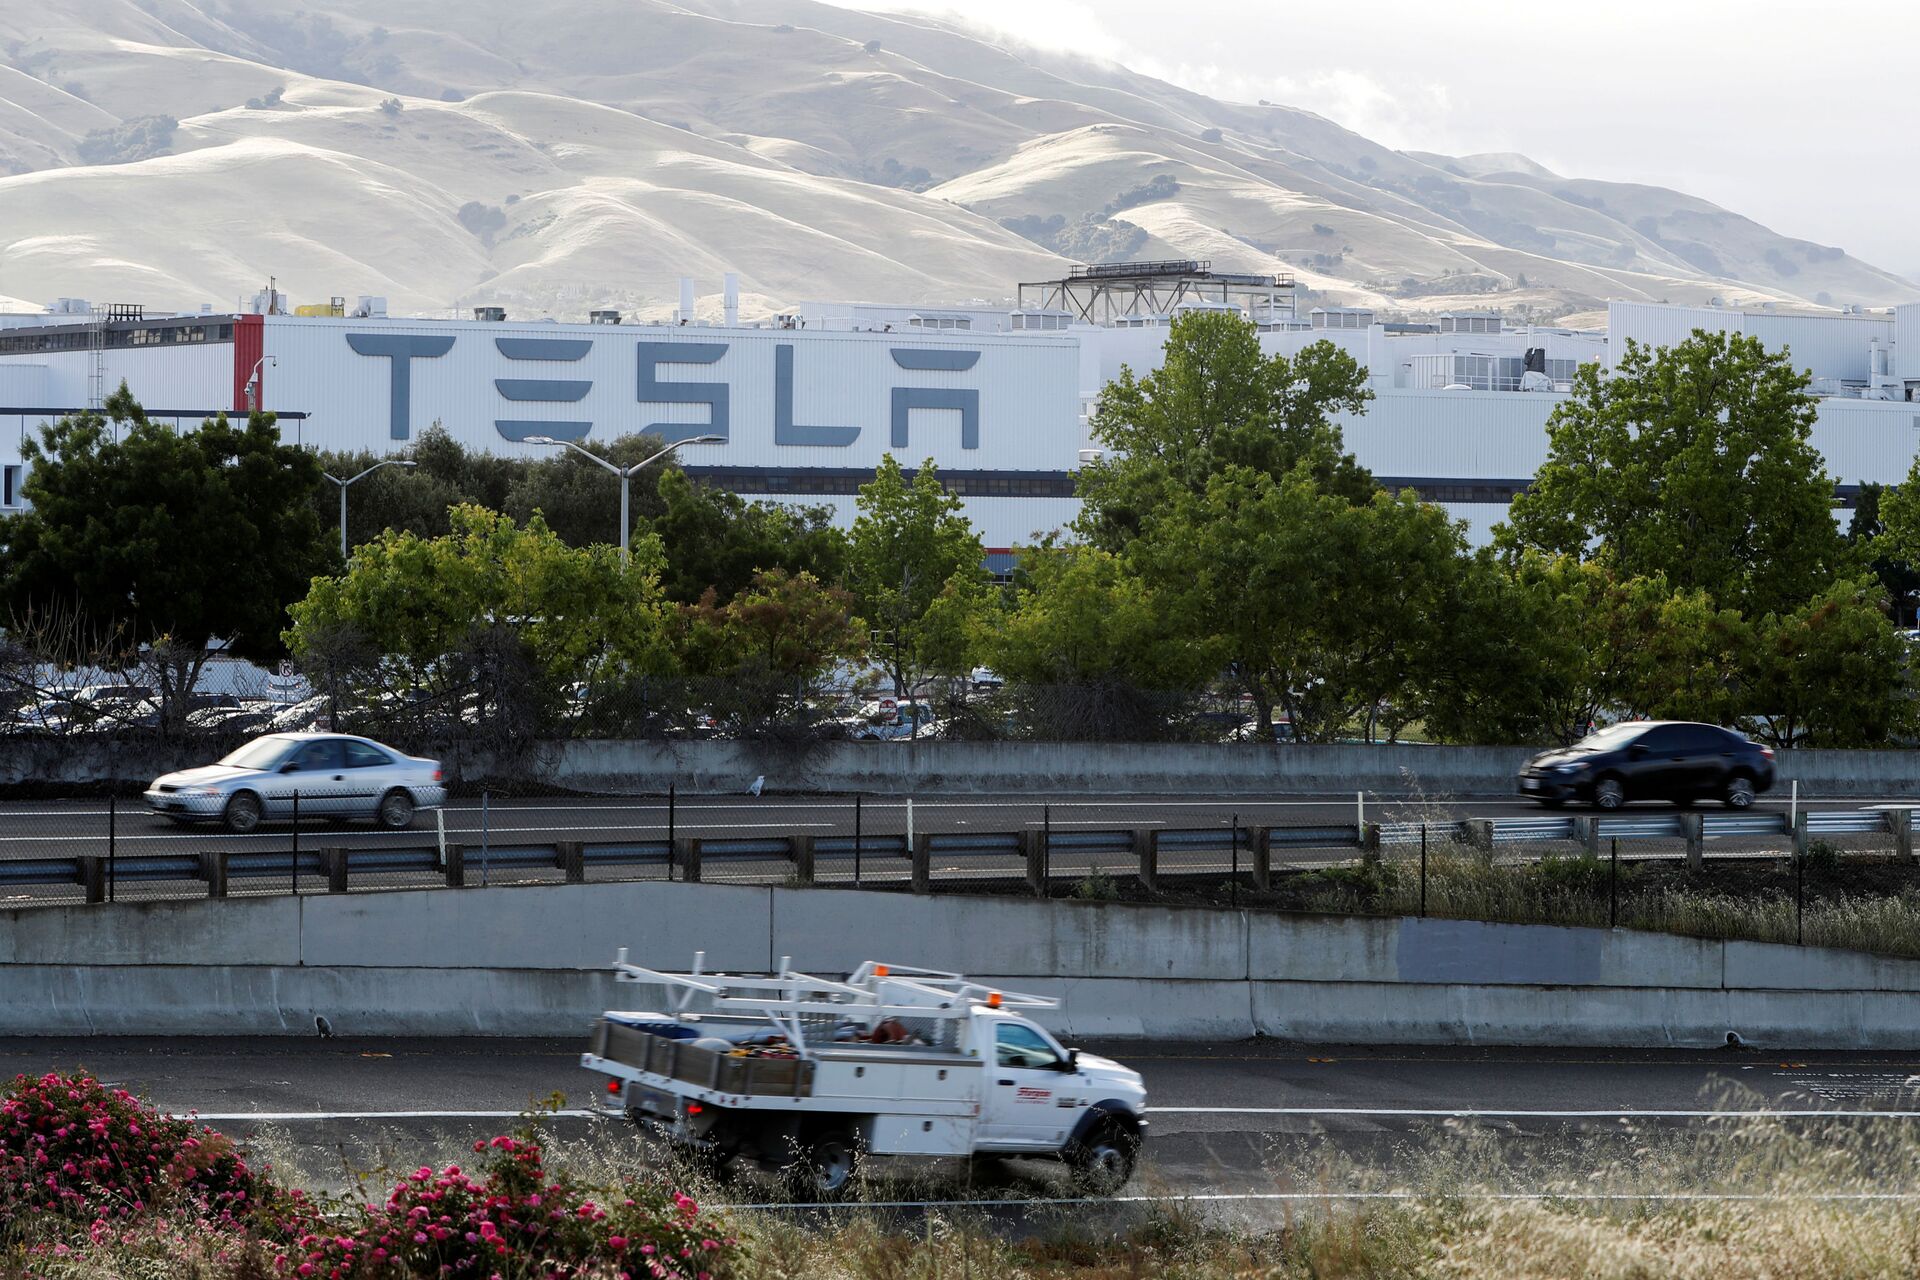 Motorists drive past Tesla's primary vehicle factory after CEO Elon Musk announced he was defying local officials' restrictions against the spread of the coronavirus disease (COVID-19) by reopening the plant in Fremont, California, U.S. May 12, 2020 - Sputnik International, 1920, 13.09.2021